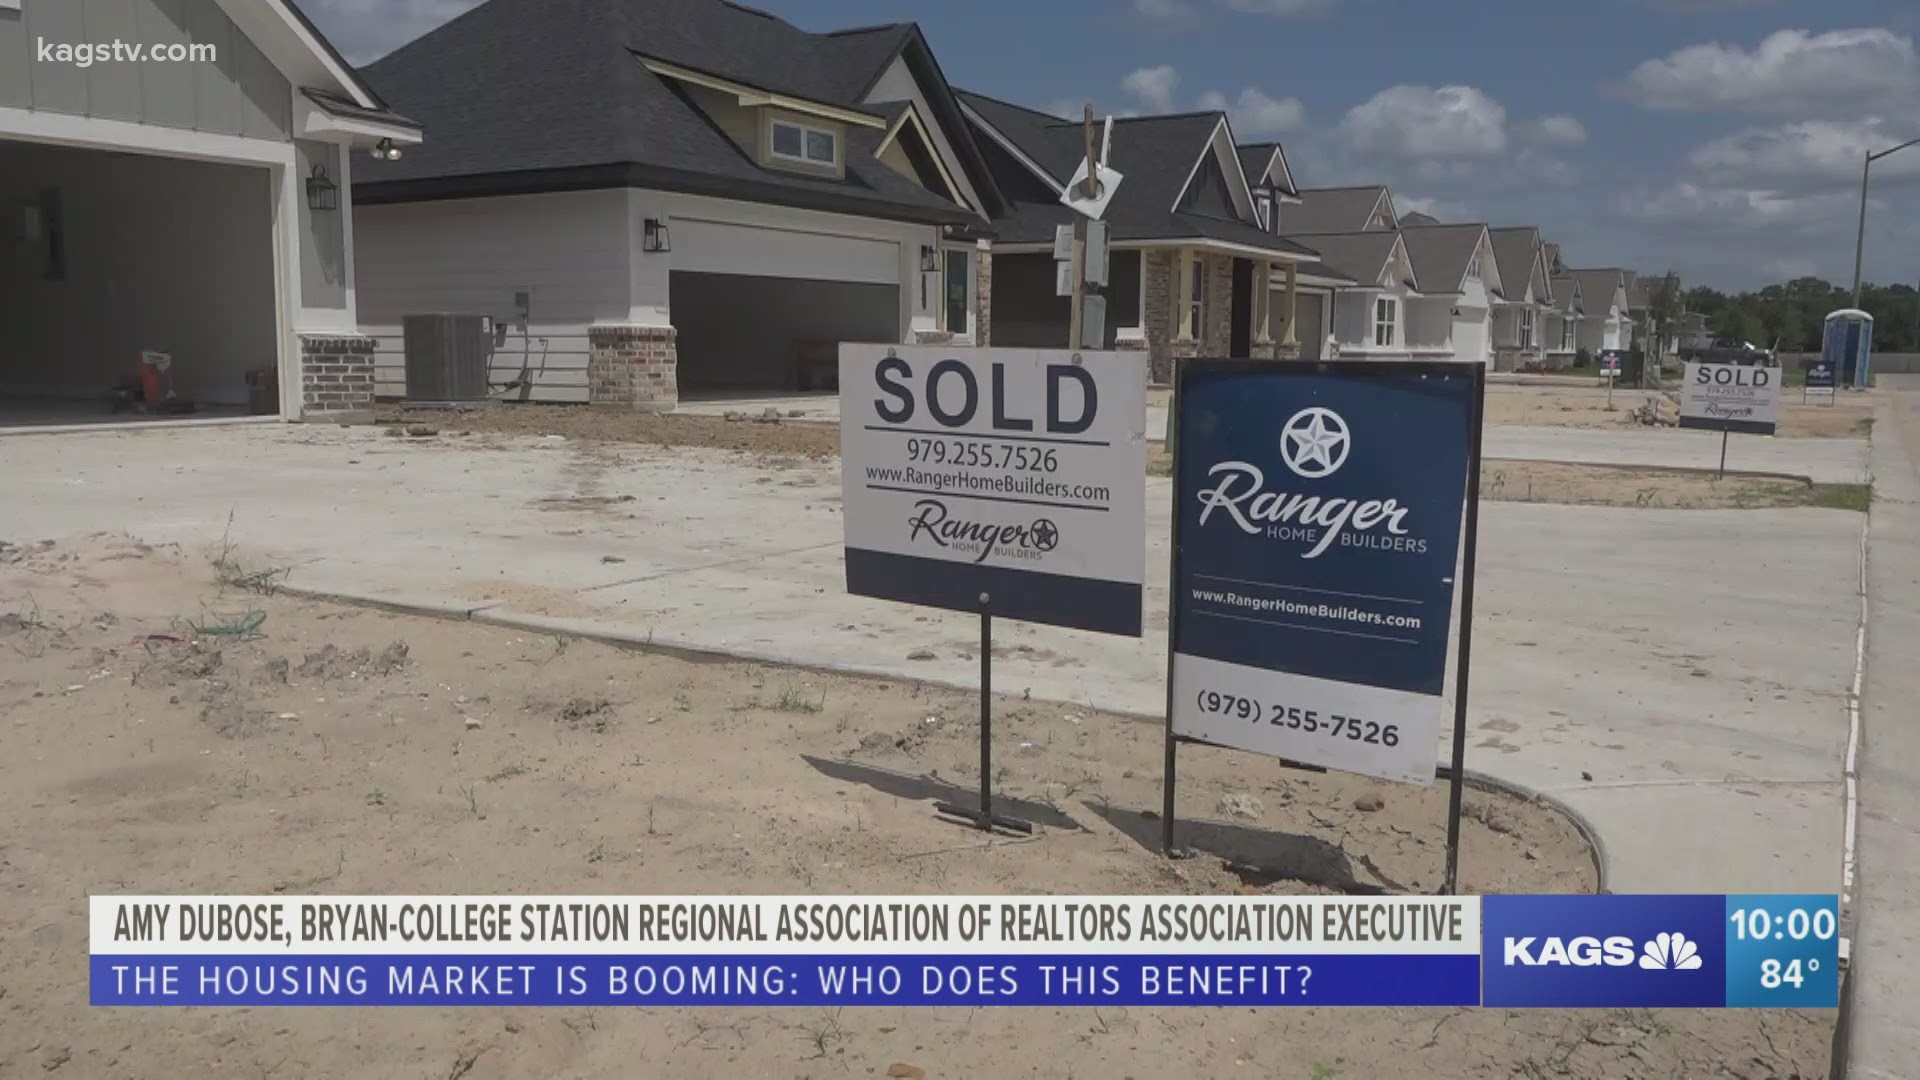 According to the association, a booming housing market has irregularities and right now that irregularity is booming for sellers.